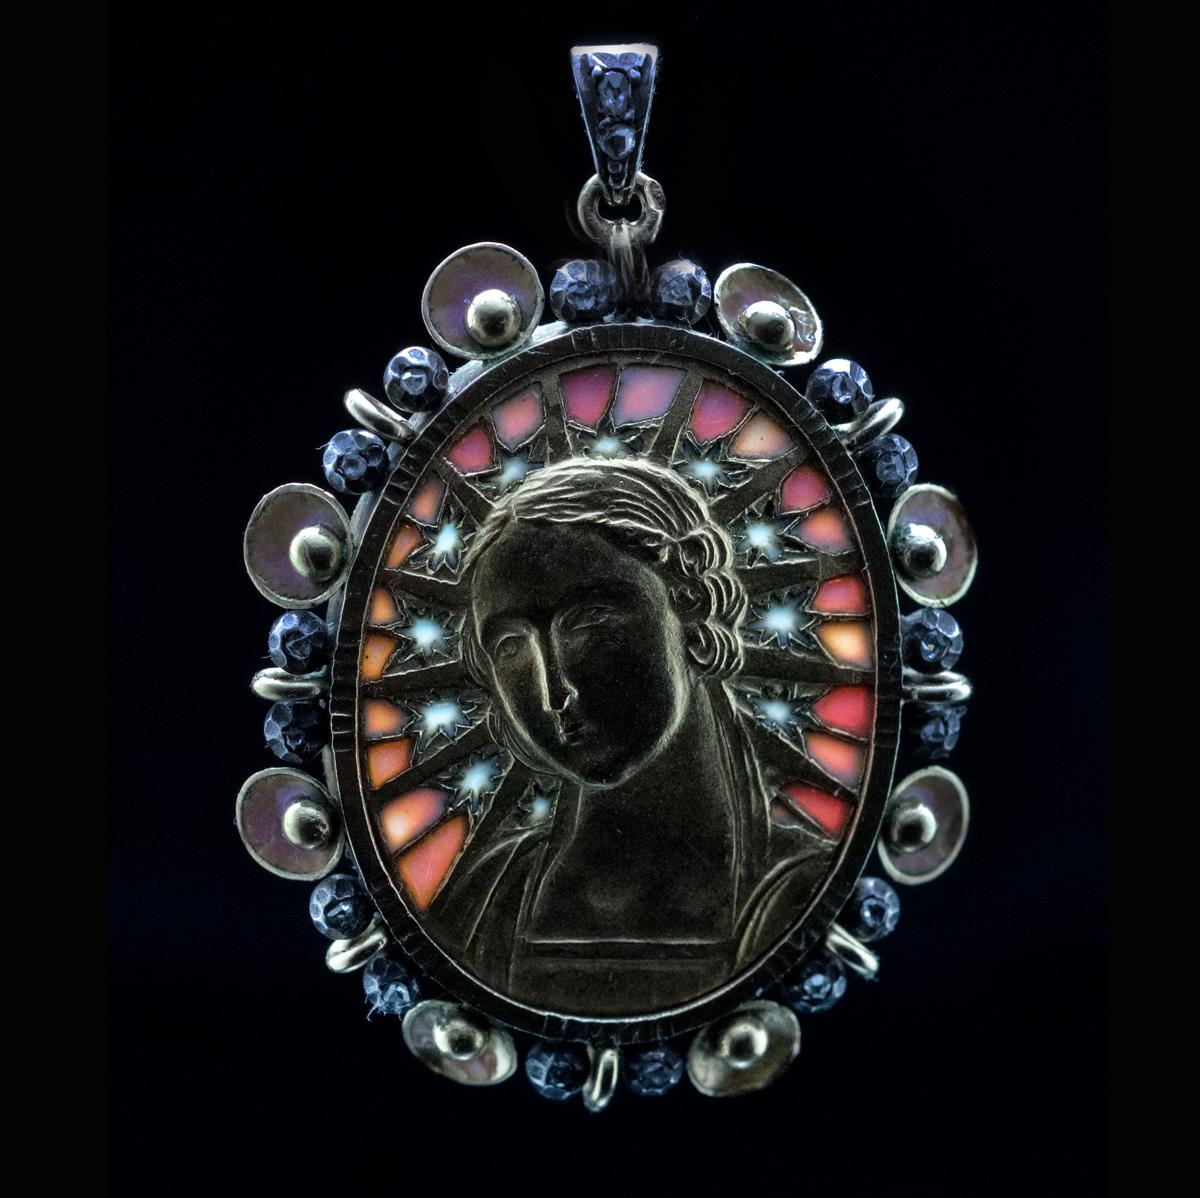 Circa 1900

This very fine Art Nouveau 18K gold Madonna pendant is attributed to a famous Barcelona (Spain) jeweler and artist Luis Masriera. The pendant is embellished with plique à jour and shaded enamels of blue and purple colors. The center